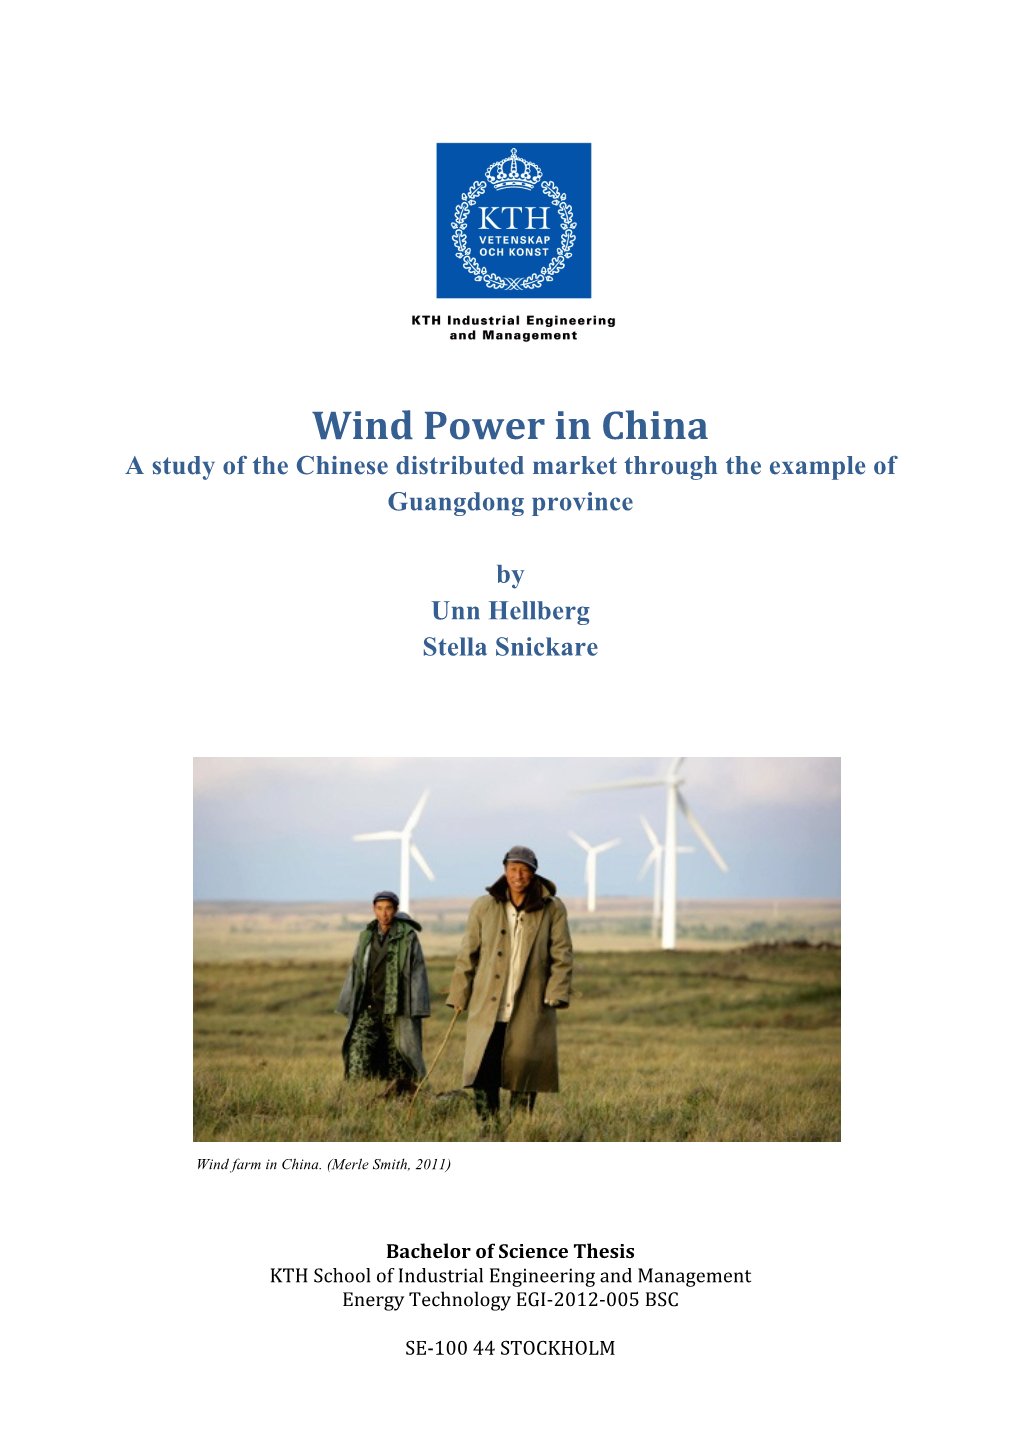 Wind Power in China a Study of the Chinese Distributed Market Through the Example of Guangdong Province